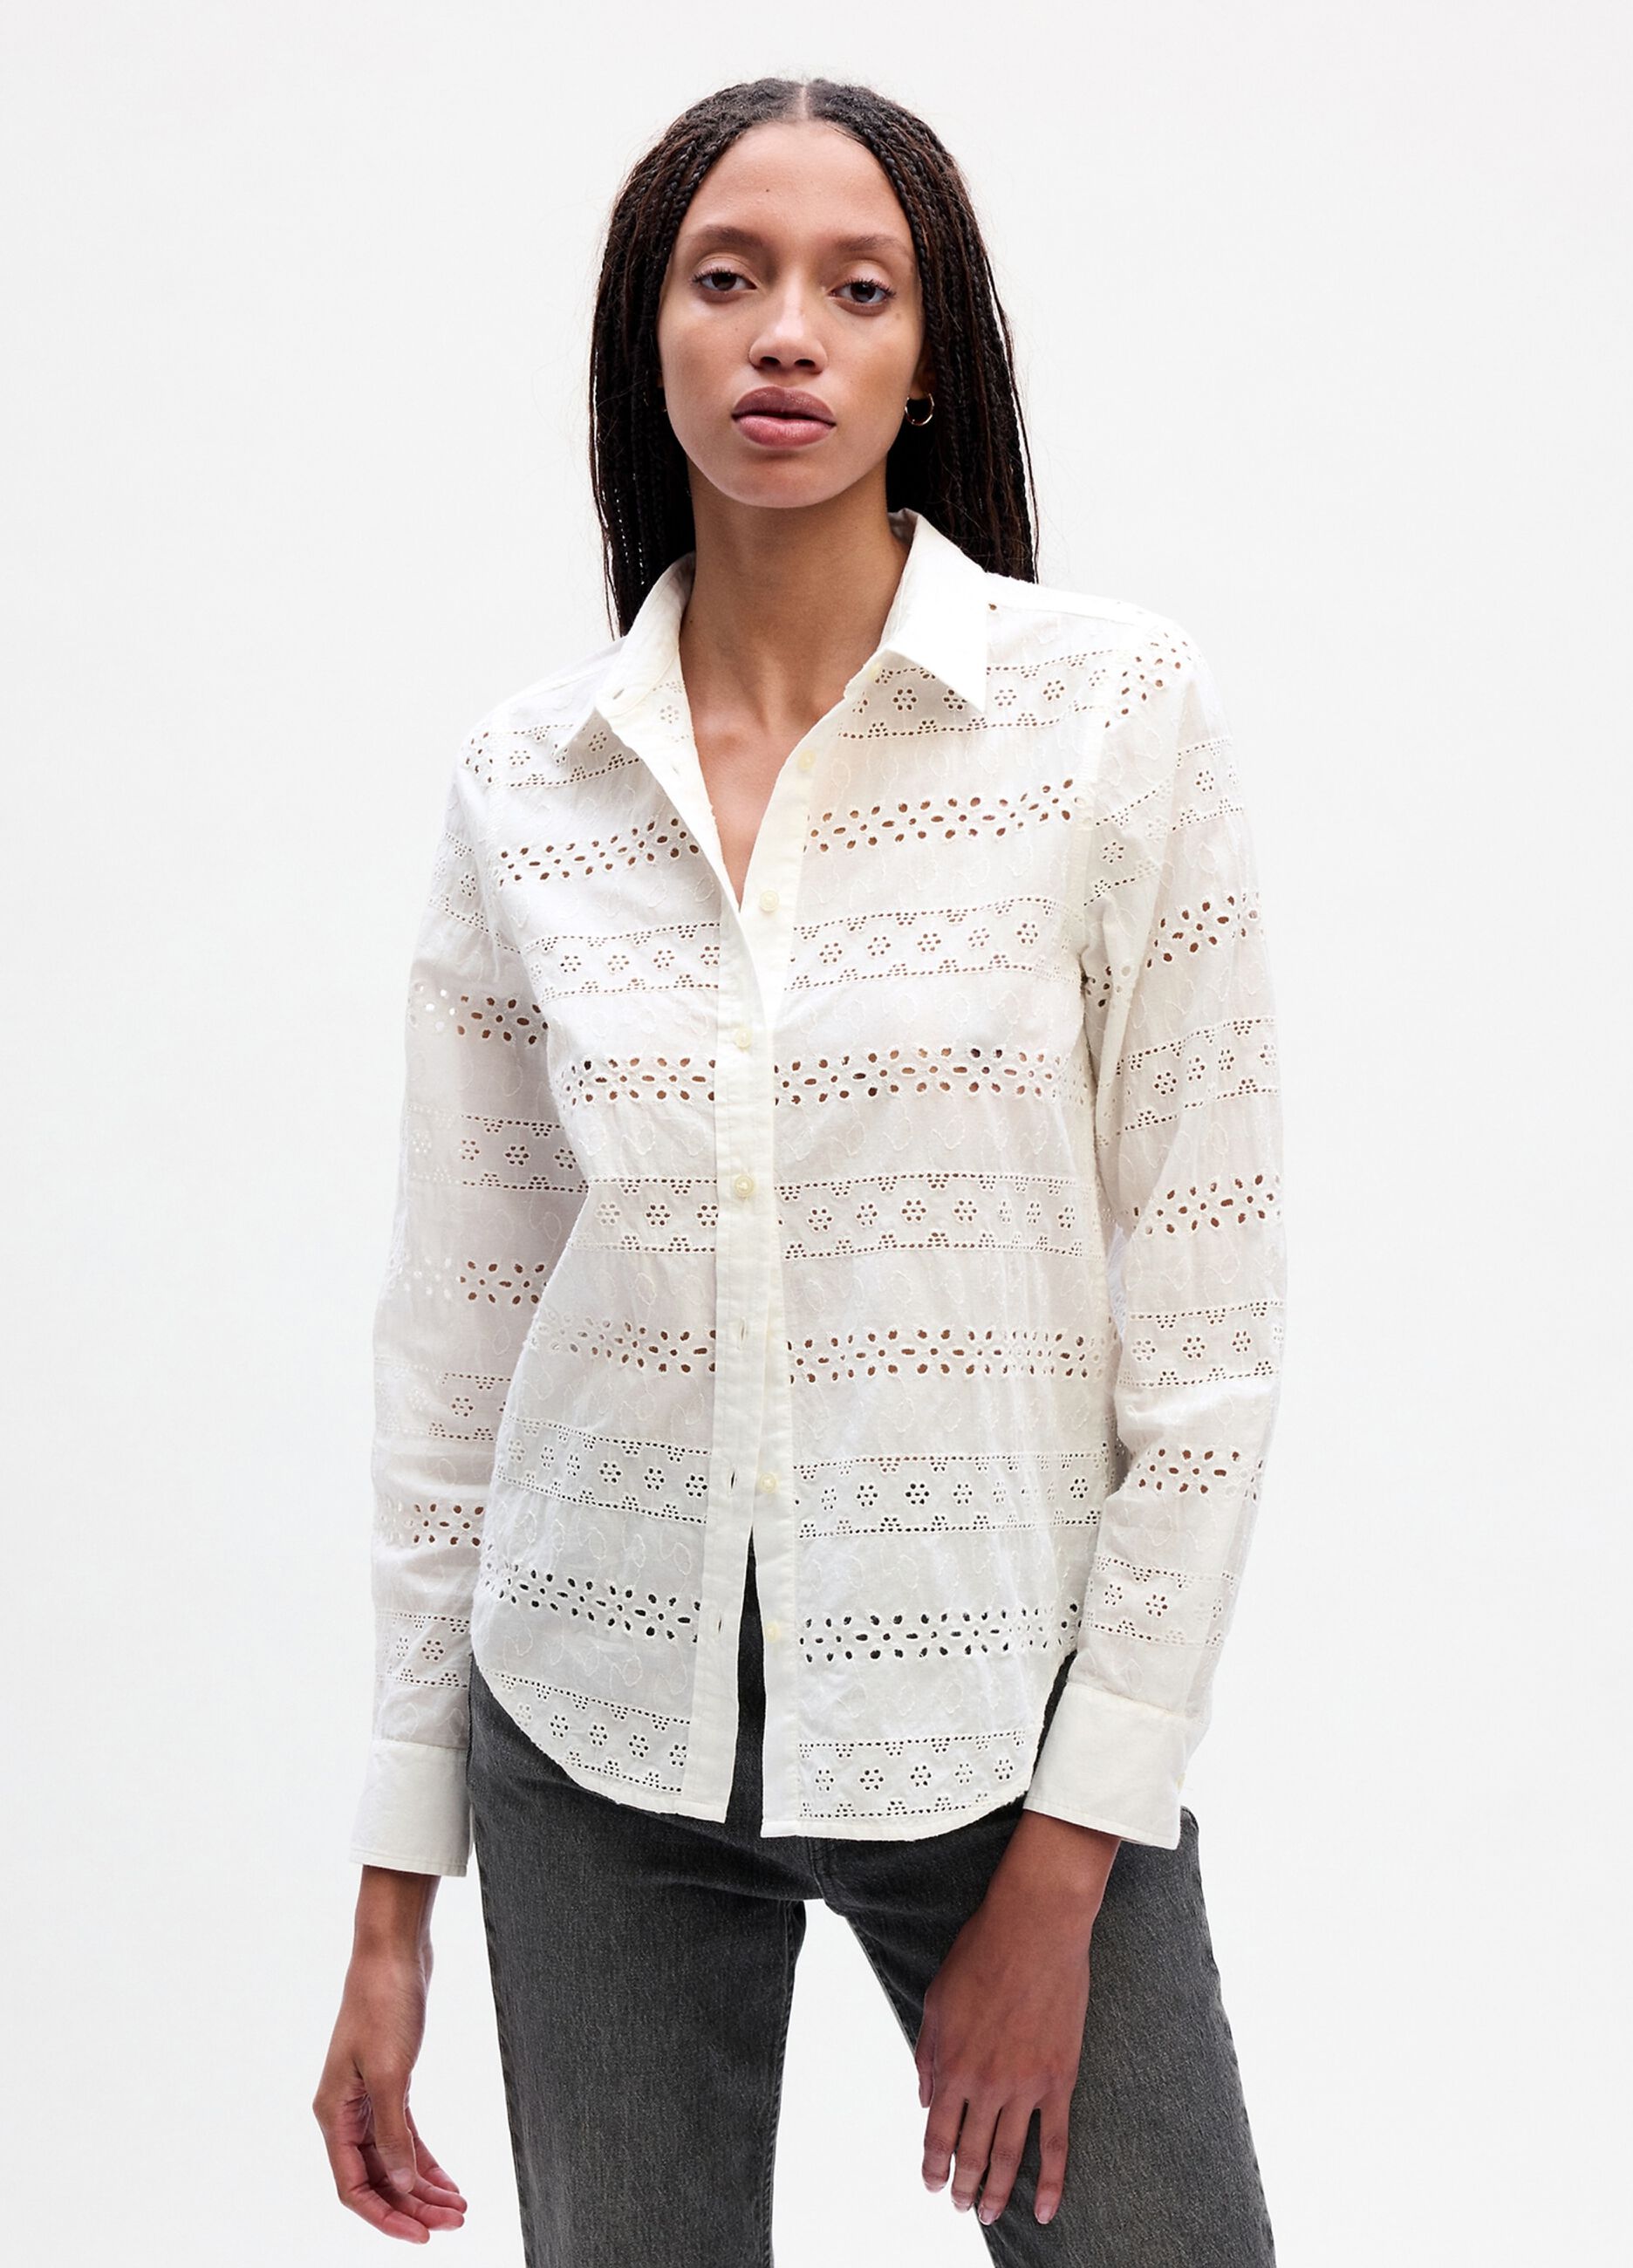 Broderie anglaise lace shirt